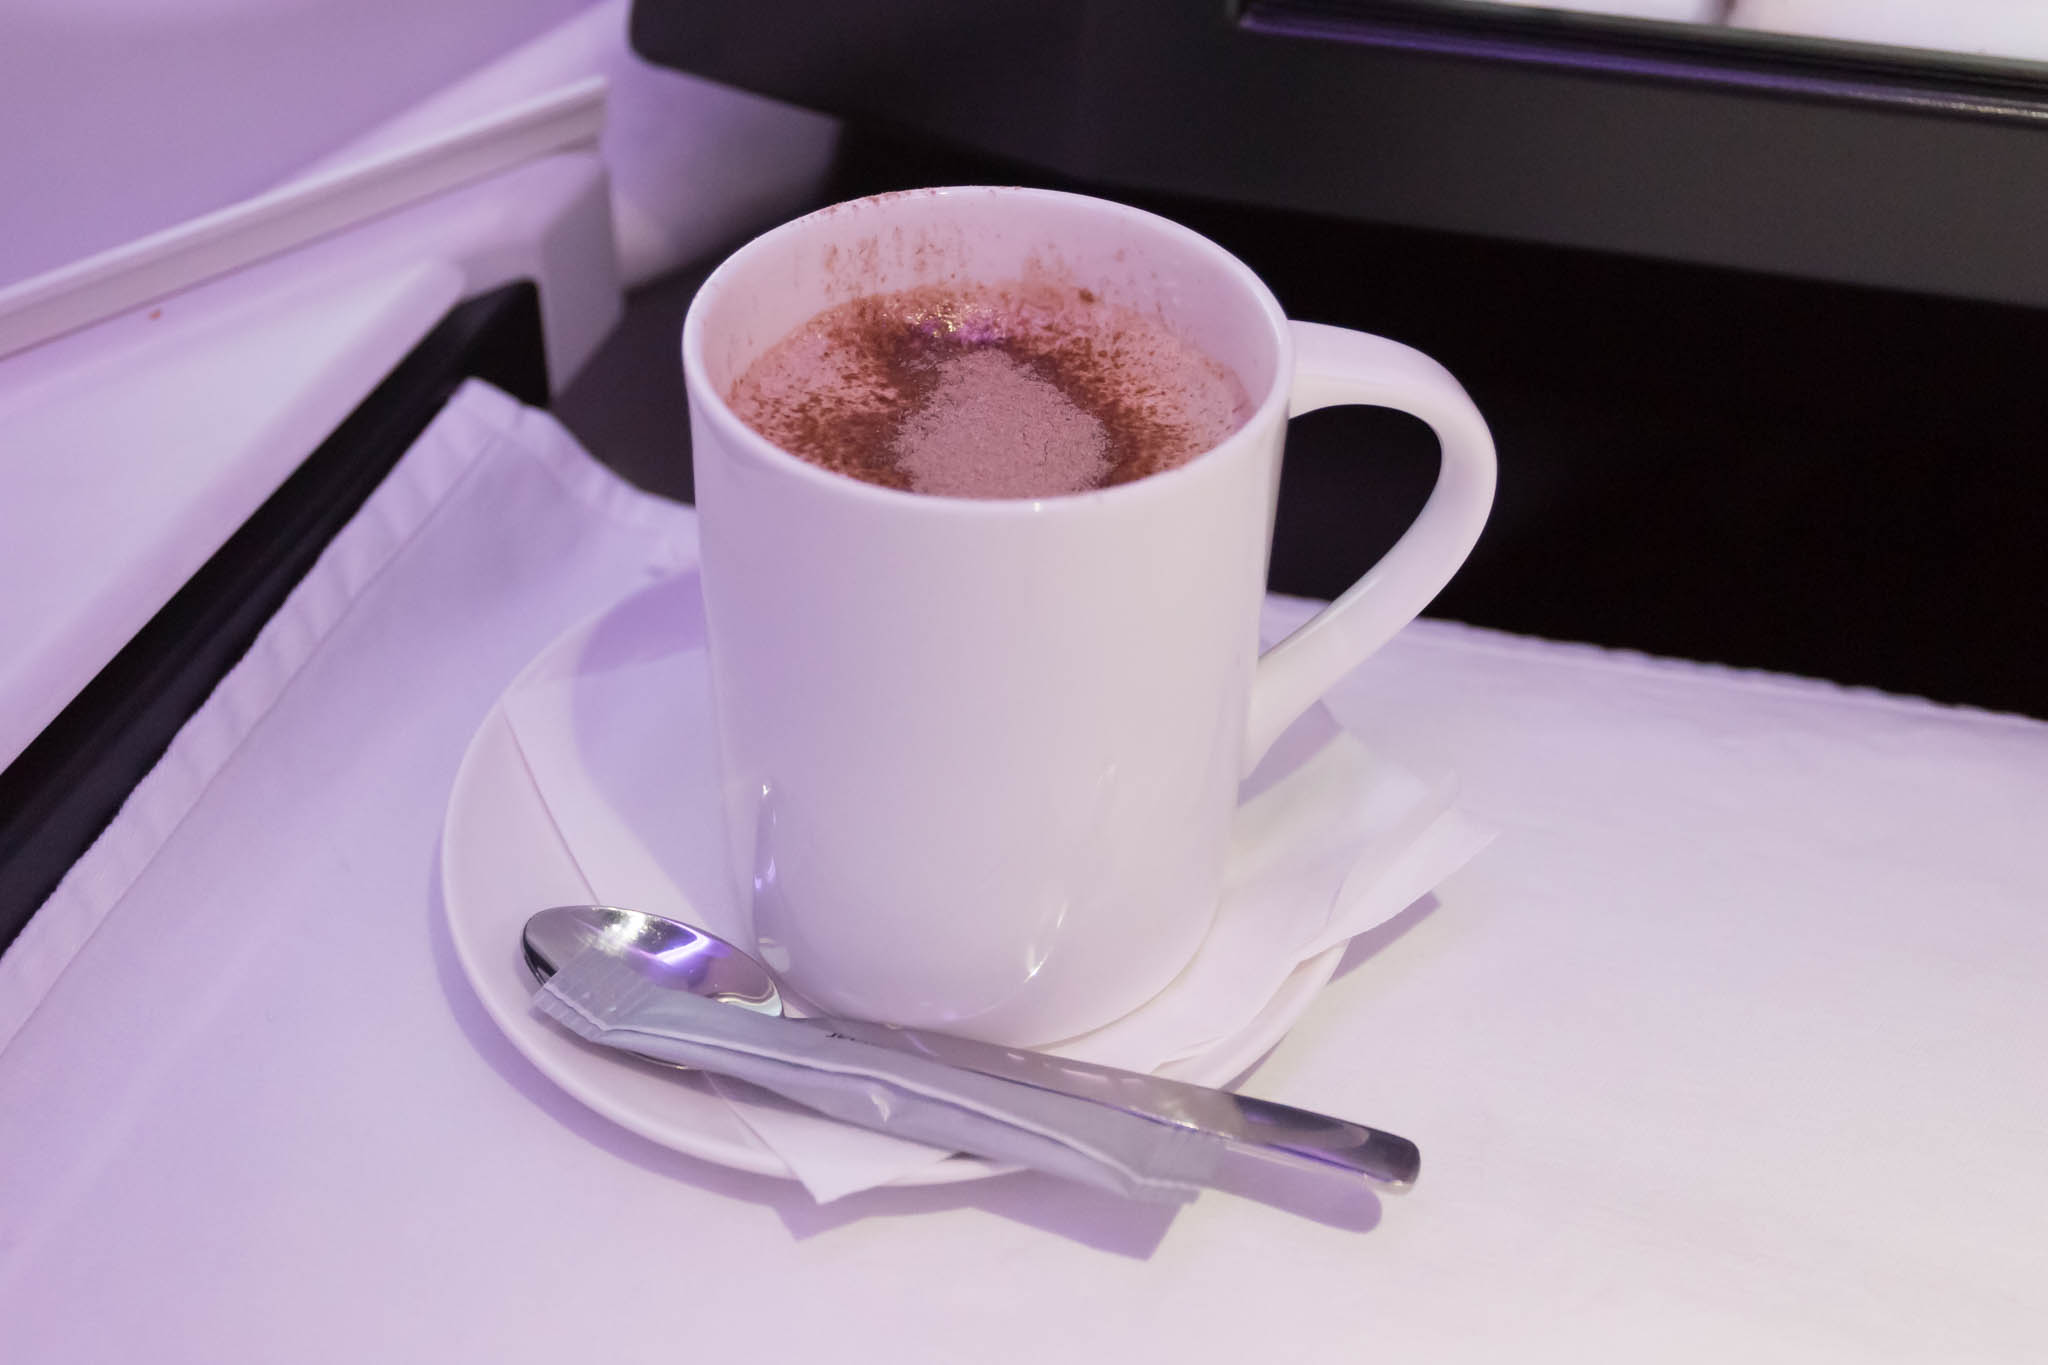 a cup of hot chocolate on a saucer with a spoon